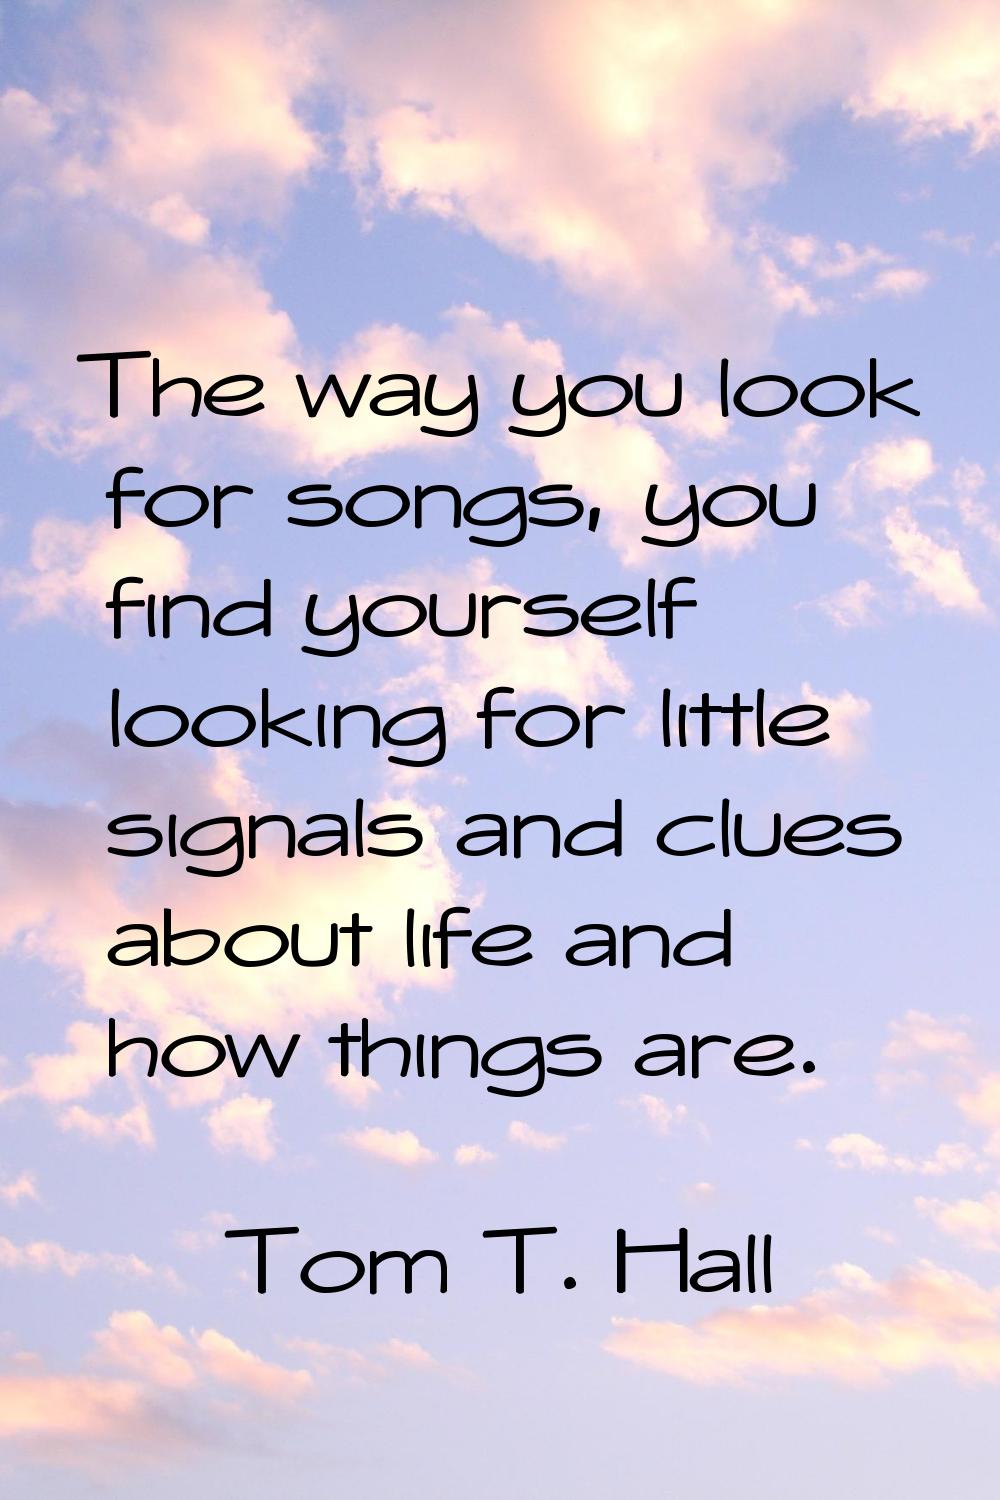 The way you look for songs, you find yourself looking for little signals and clues about life and h